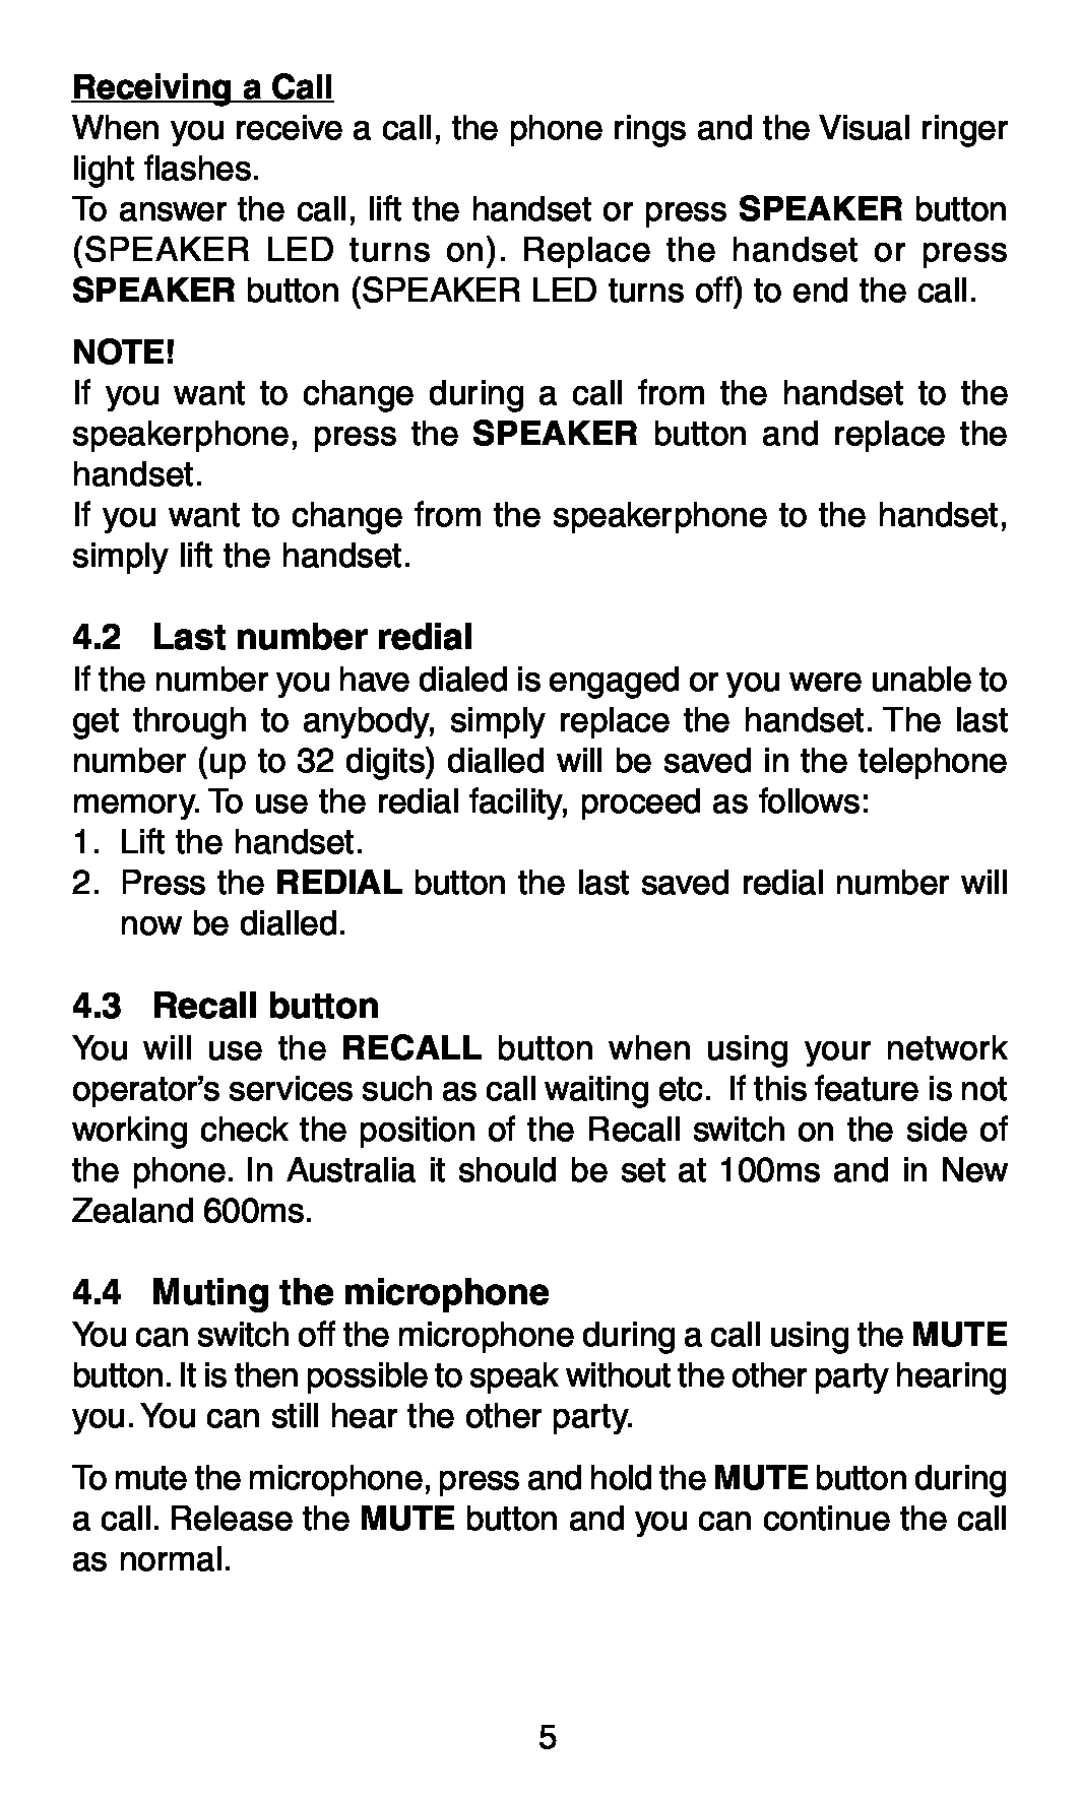 Oricom TP58 manual Receiving a Call, Last number redial, Recall button, Muting the microphone 